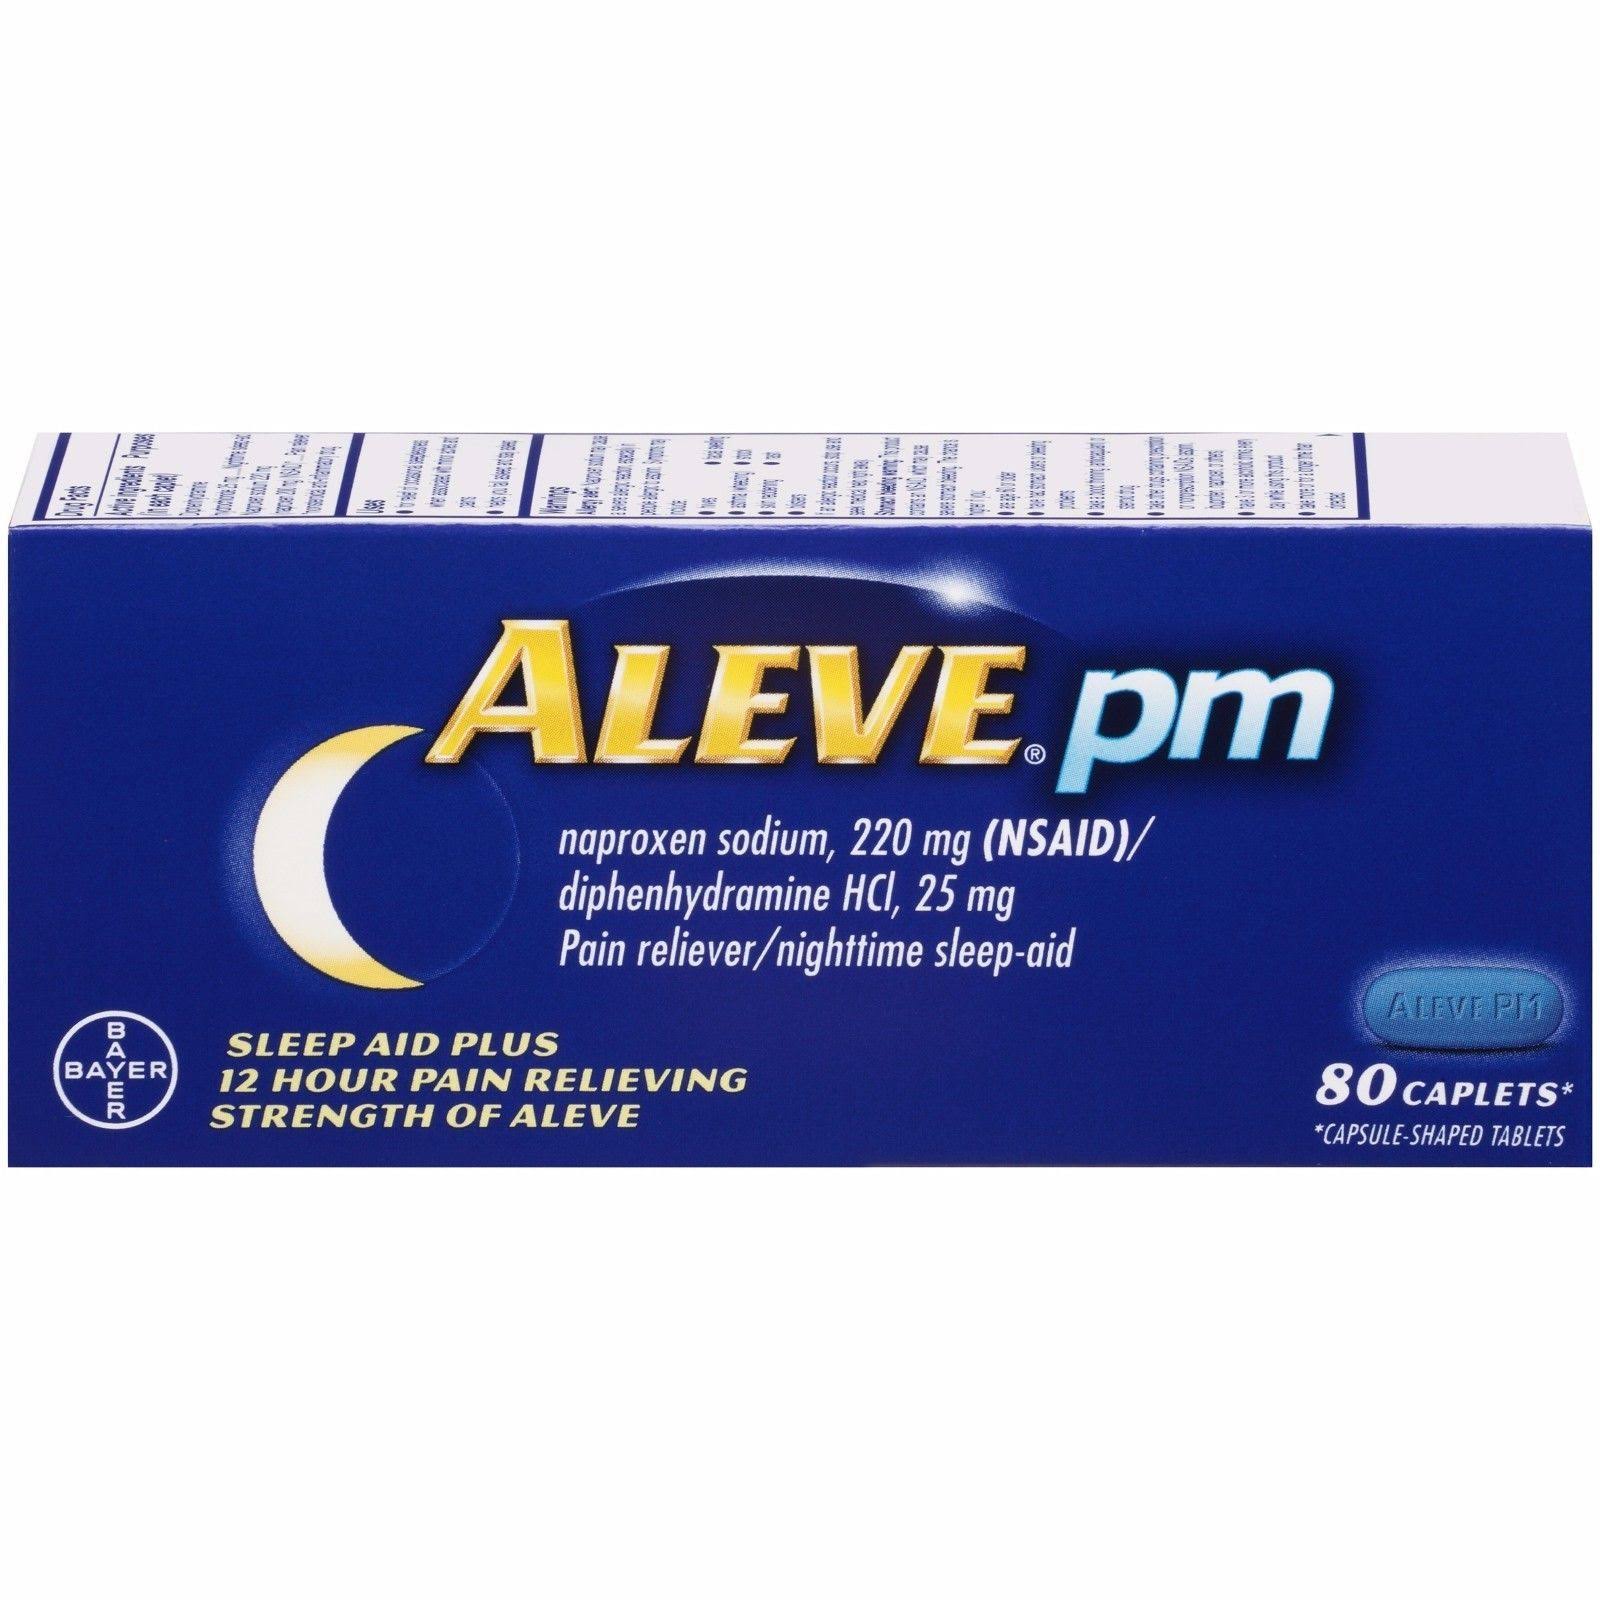 Bayer Aleve Pm Sleep Aid Plus Pain Reliever - 80 Caplets